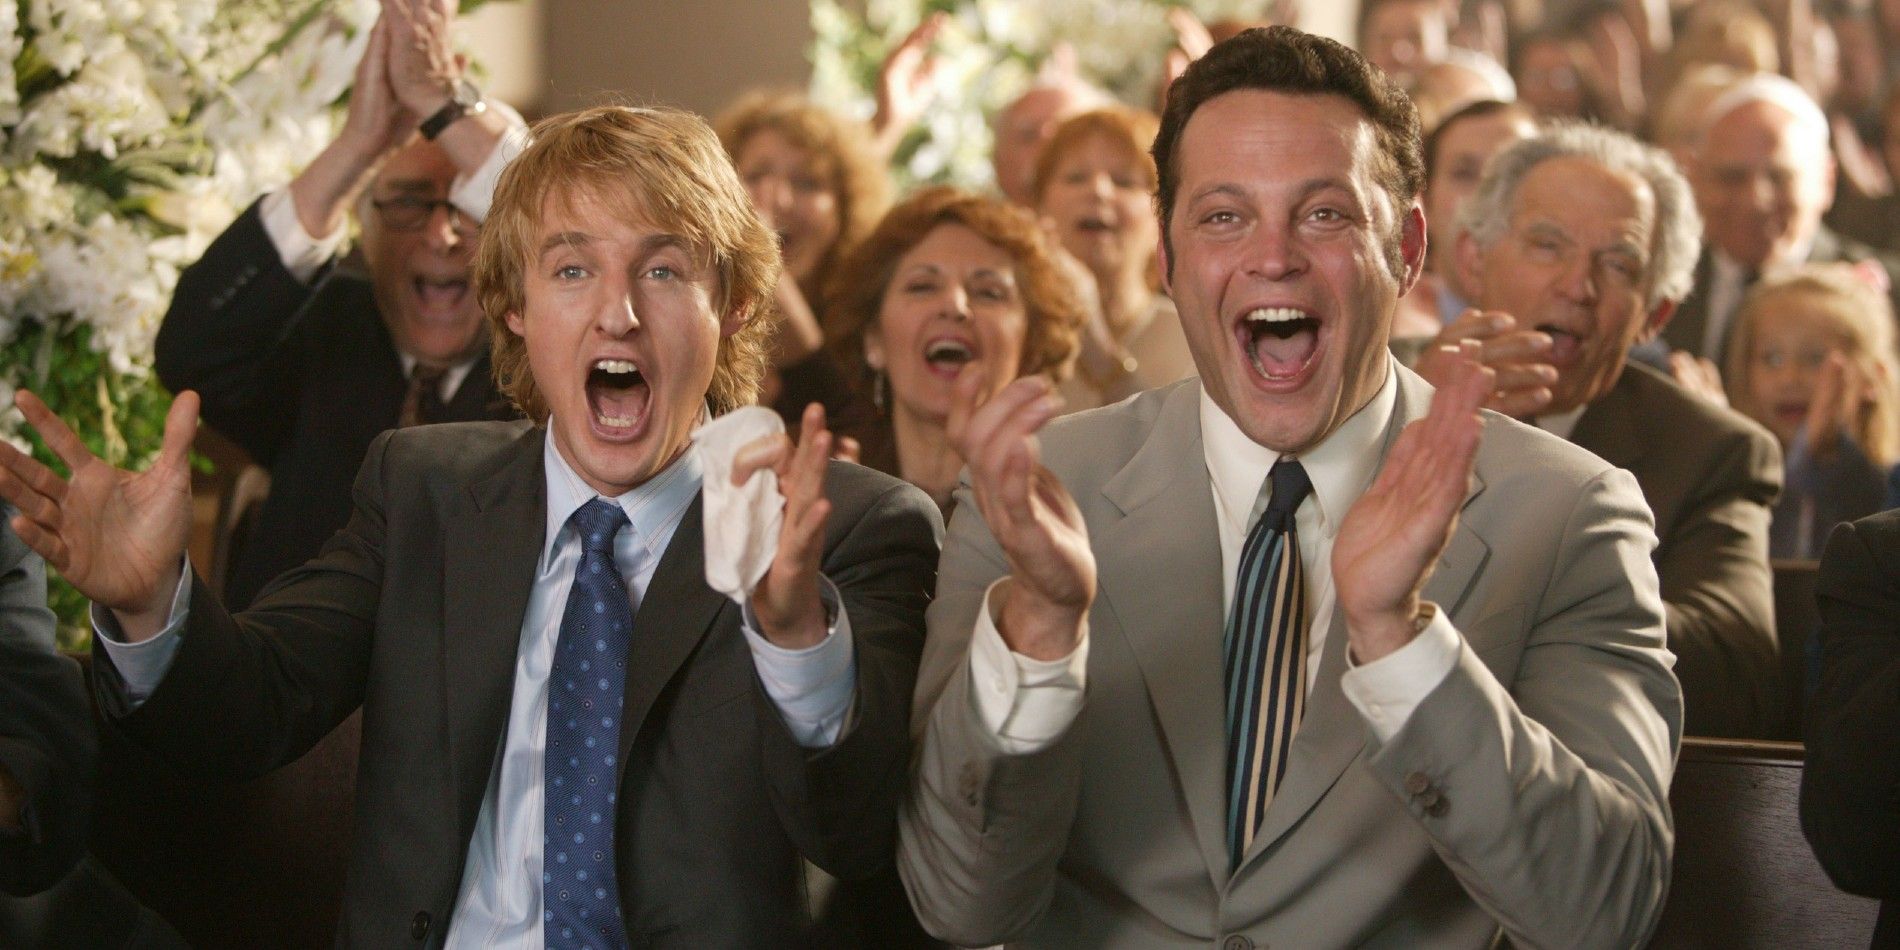 John and Jeremy clap loudly along with the other attendees at a wedding in Wedding Crashers